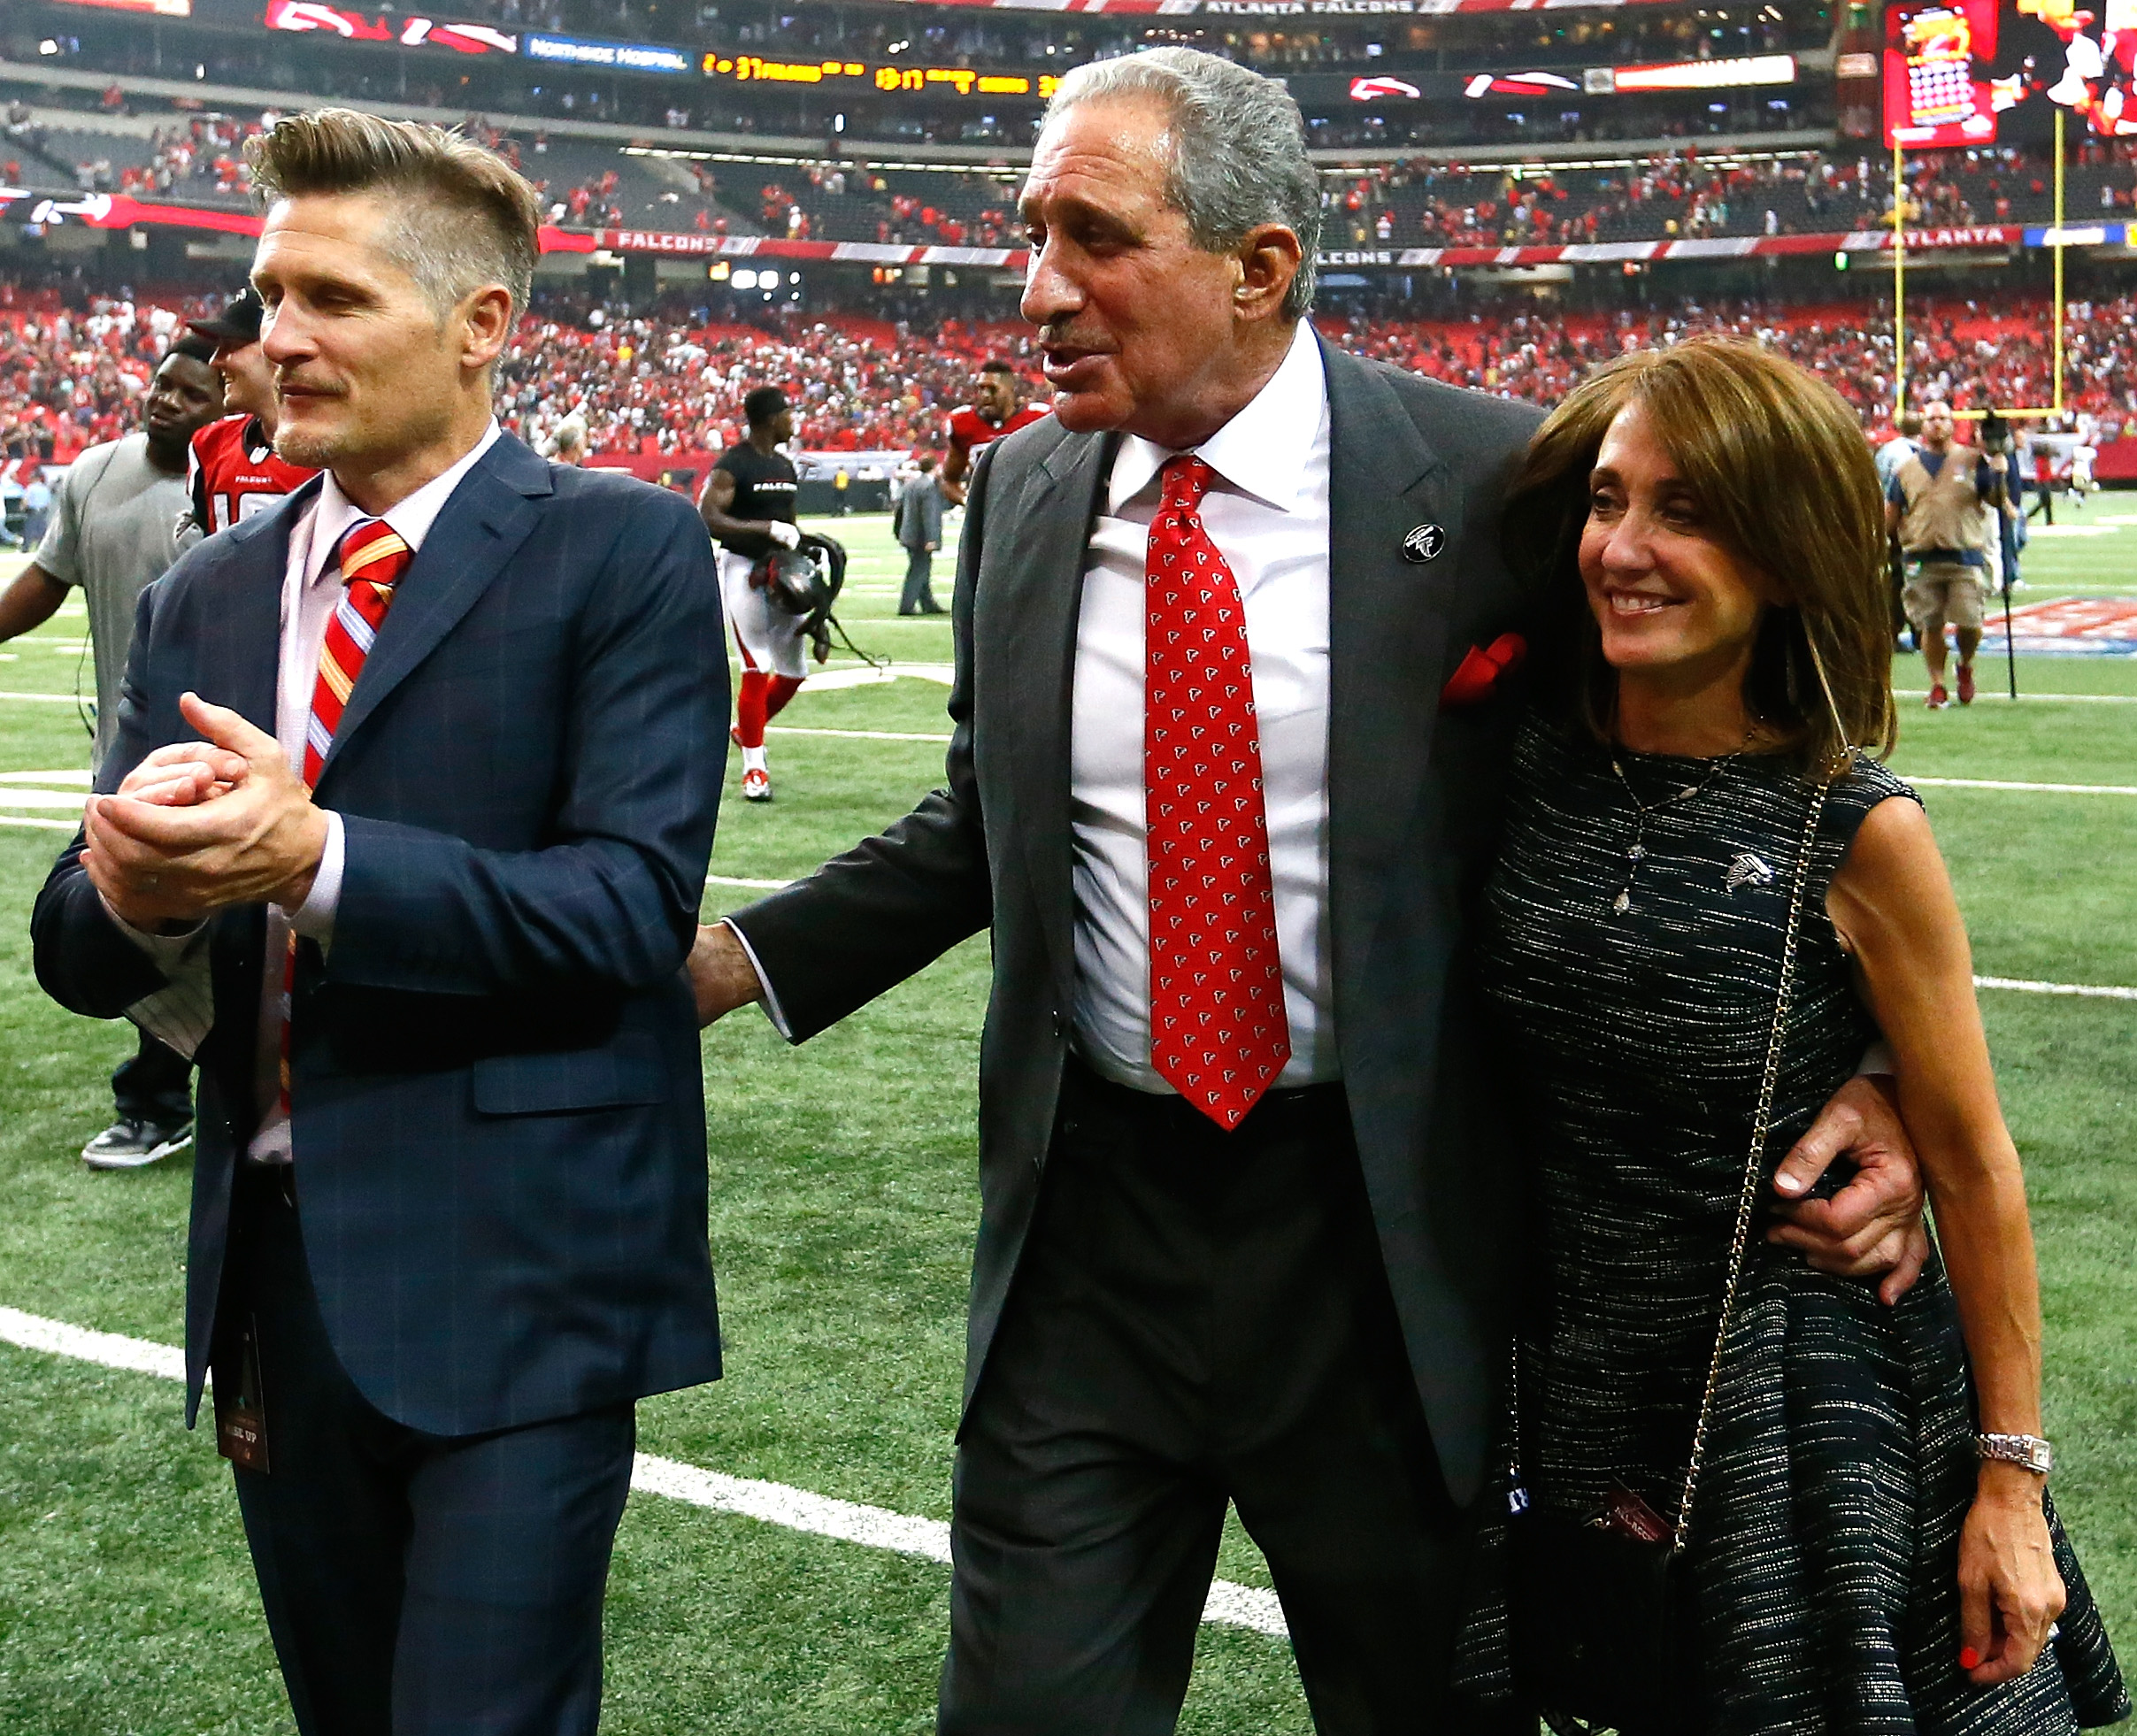 Angela Macuga, Arthur Blank’s Wife 5 Fast Facts You Need to Know